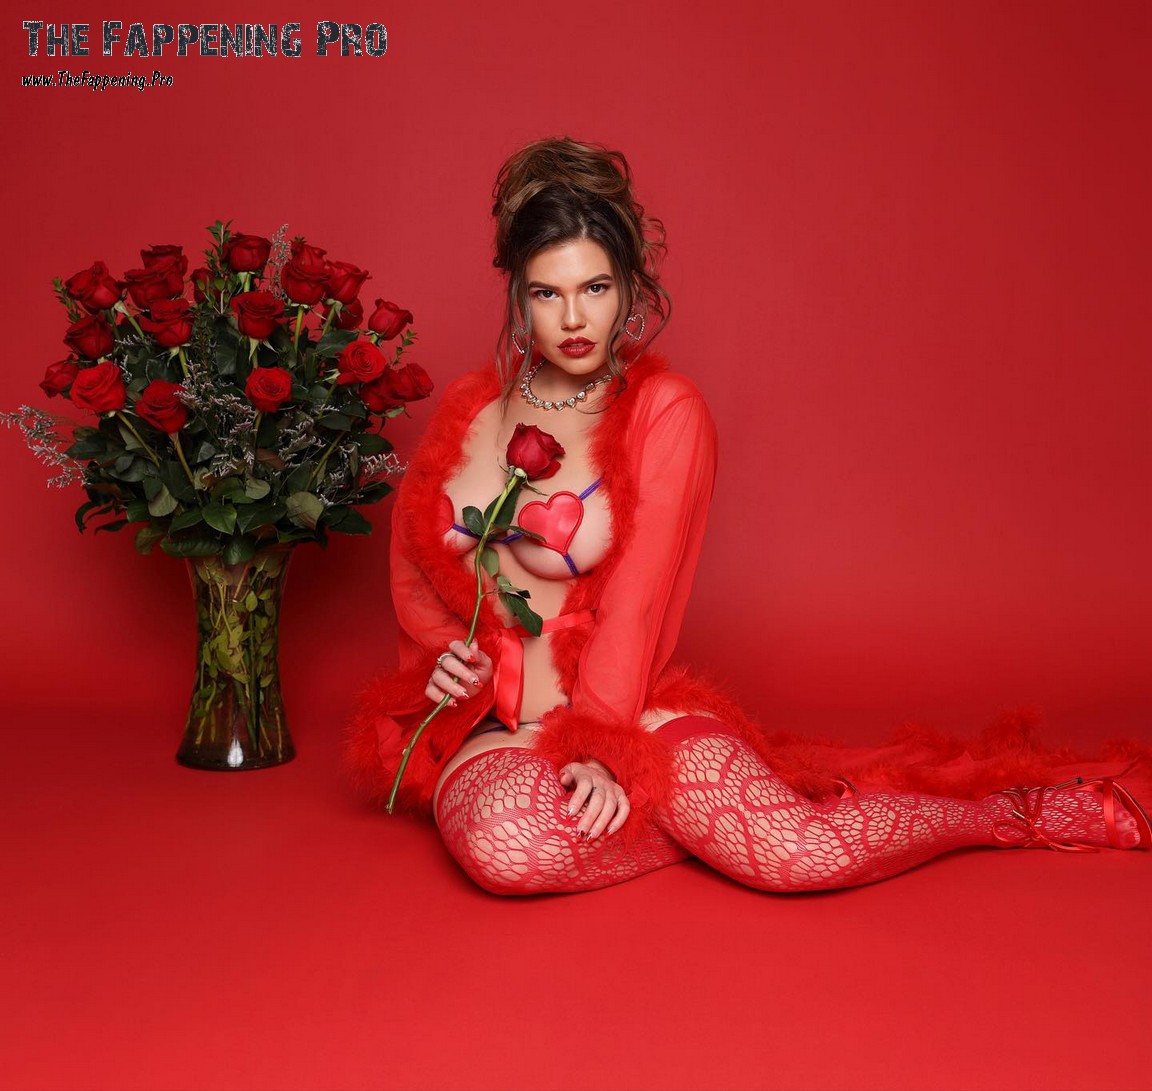 Get ready for some sizzling hot photos from Chanel West Coast! The 35-year-old celebrity stunned fans with her Valentine's Day photos, flaunting her curves in a revealing bra and red stockings. After a recent pregnancy, Chanel is back to looking slim and seductive. And that's not all - she has a new Snapchat page where she promises to share even more steamy pictures. Don't miss out on this tantalizing glimpse into Chanel's sexy side!